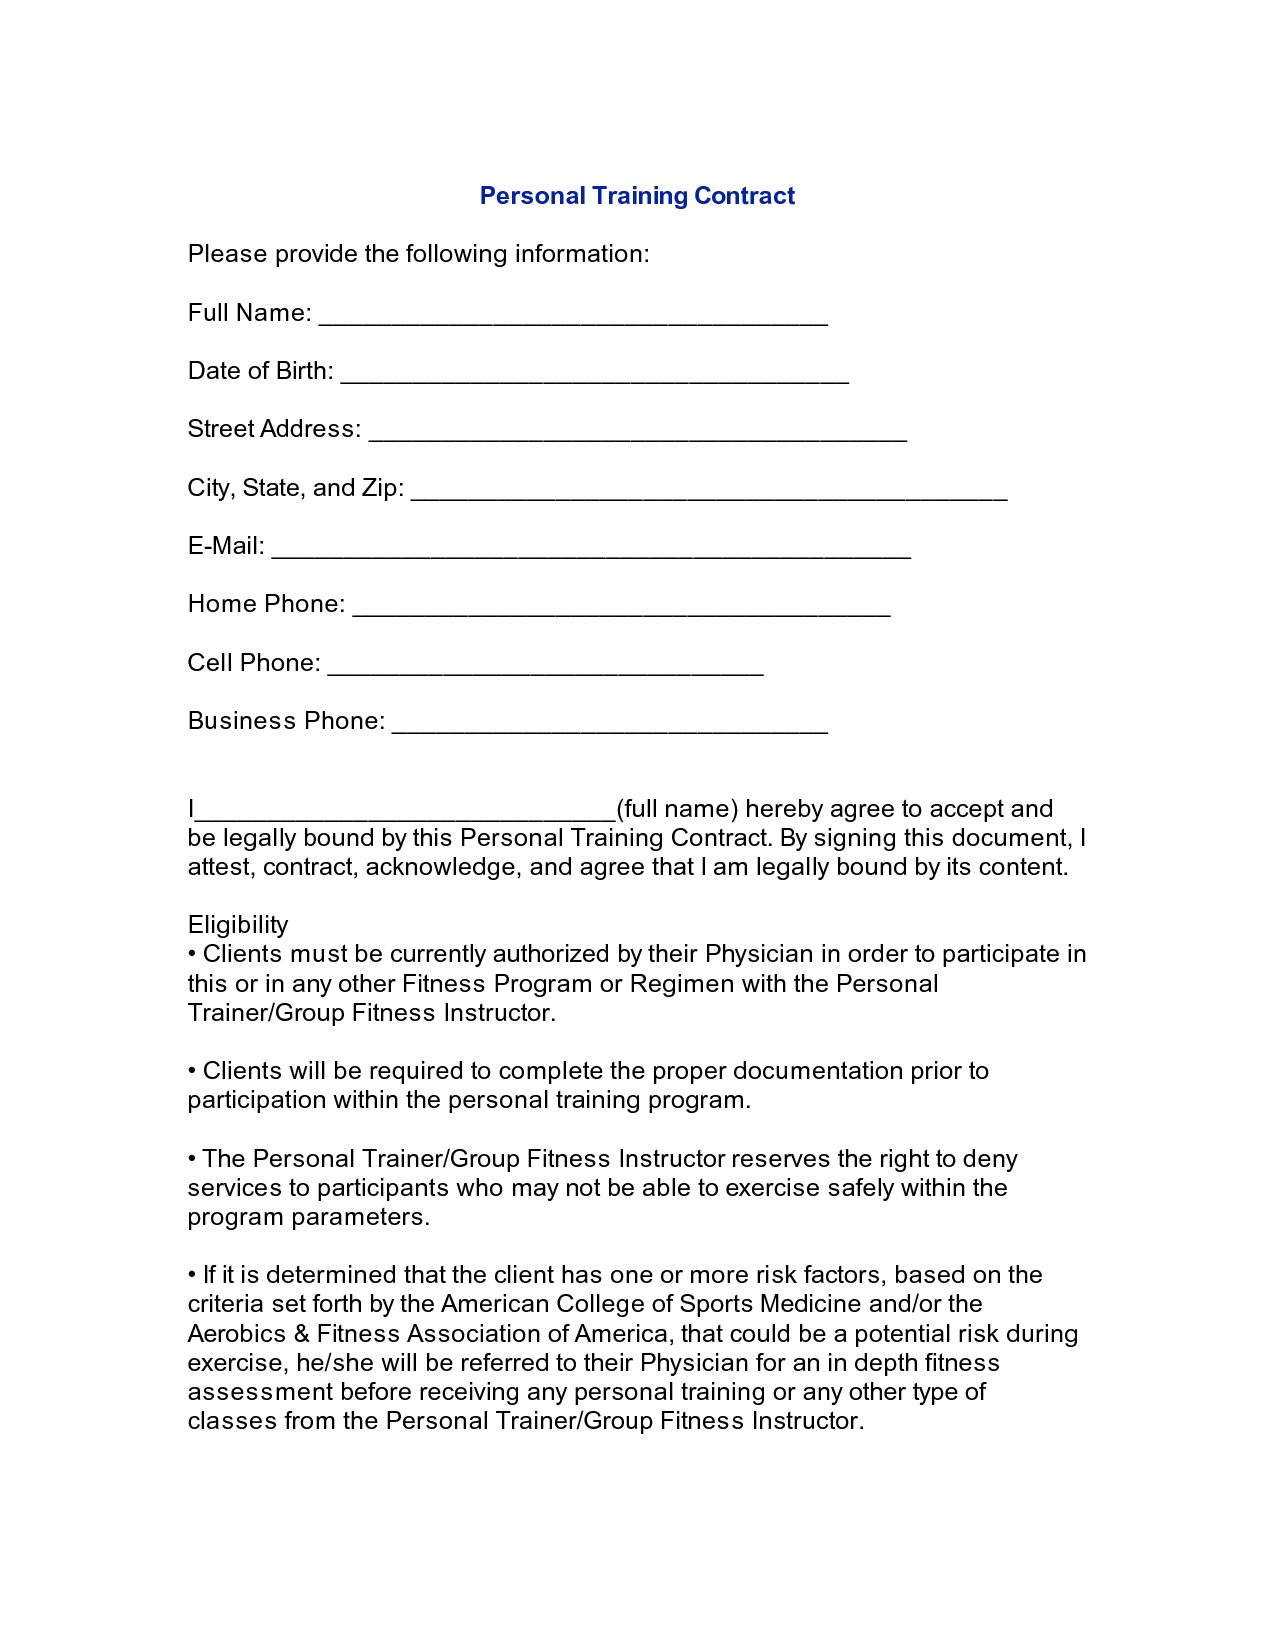 Personal Agreement Template Personal Agreement Contract Template Clean 10 Best Of Personal